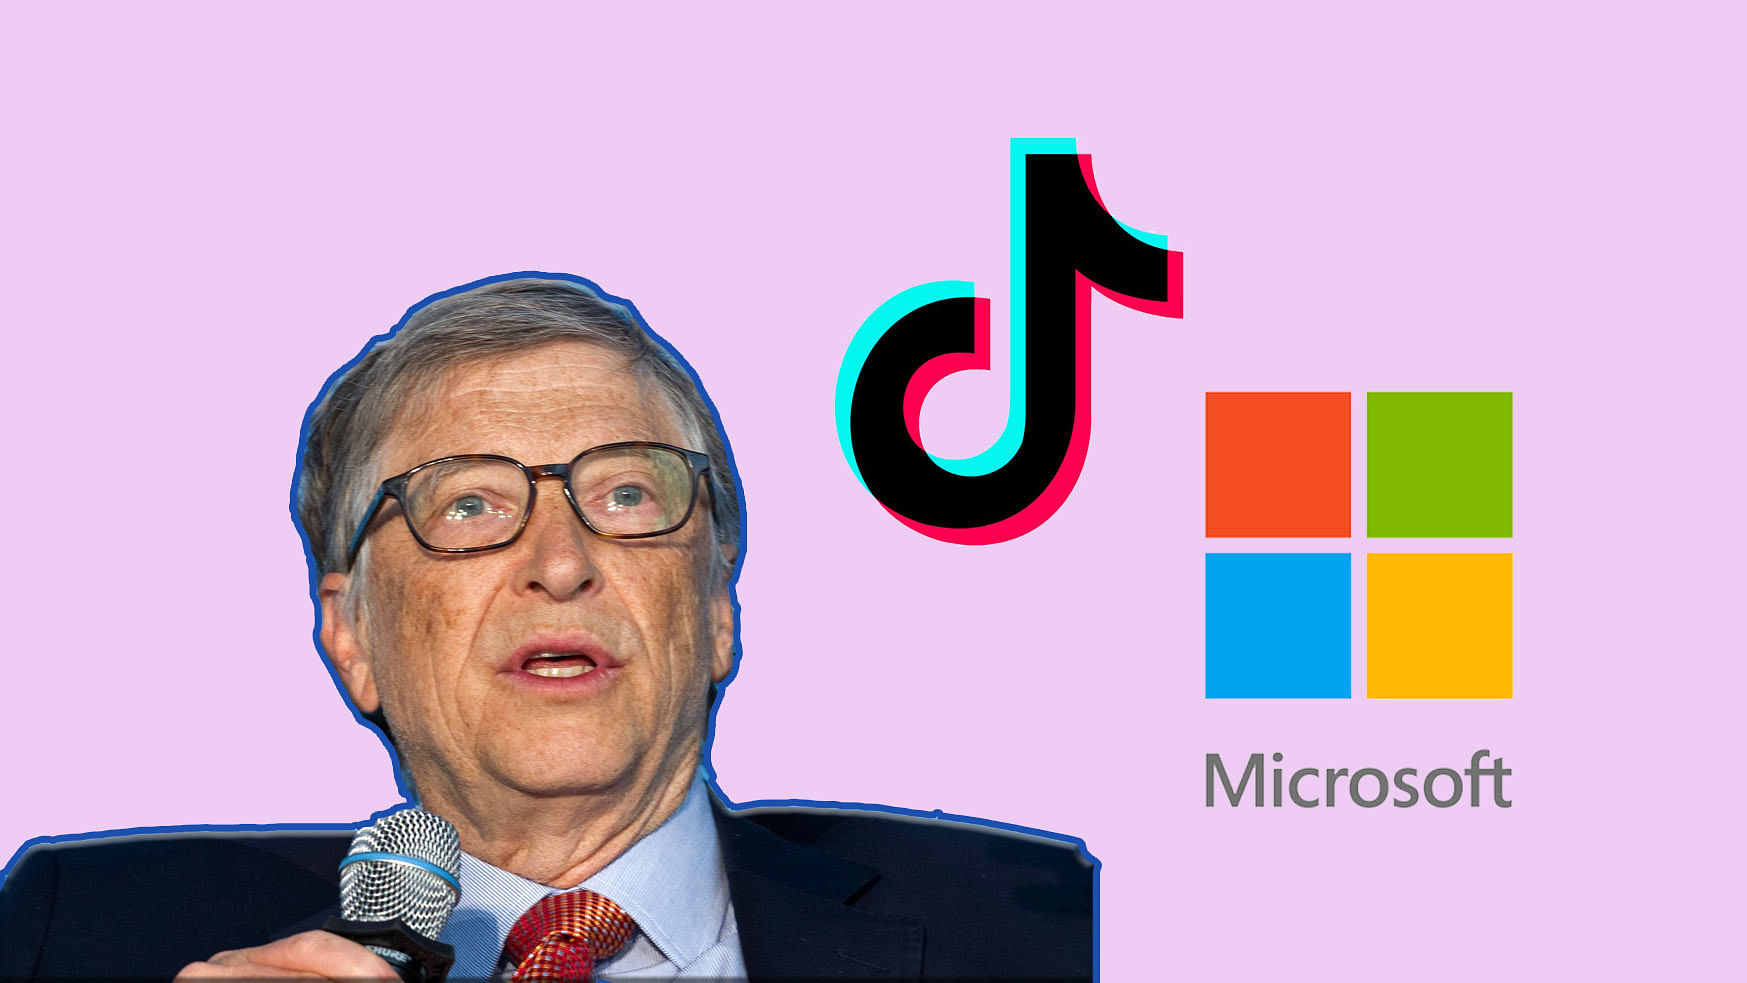 Bill Gates in a recent interview called the Microsoft-TikTok deal a ‘poison chalice’.